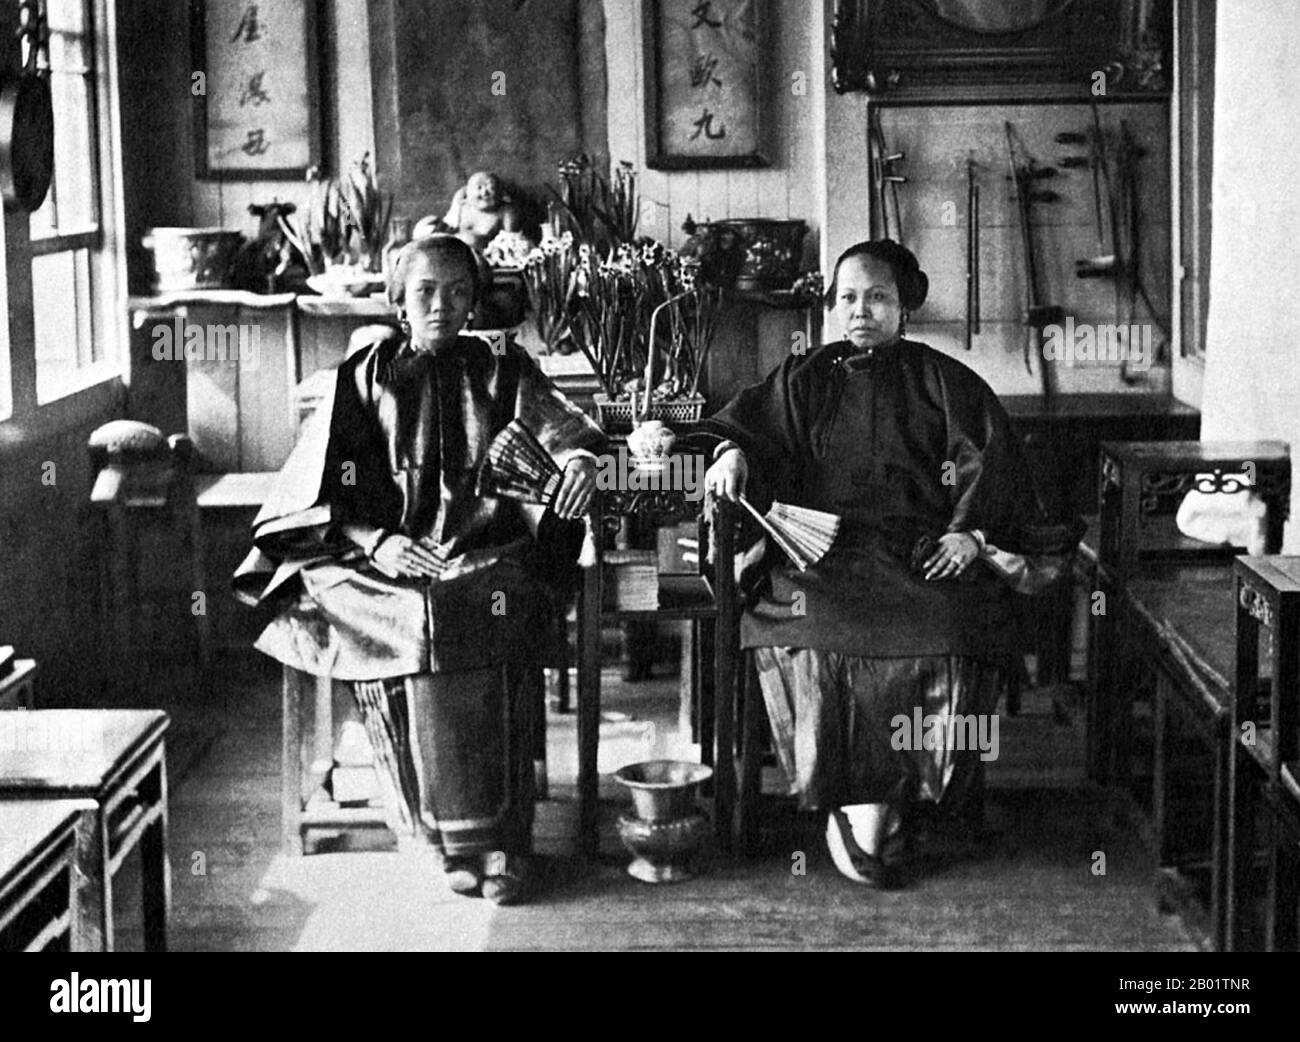 USA: Two well-to-do ethnic Chinese women in a restaurant, musical instruments hanging on wall to right. San Francisco Chinatown, c. 1900.  San Francisco's Chinatown was the port of entry for early Hoisanese and Zhongshanese Chinese immigrants from the Guangdong province of southern China from the 1850s to the 1900s. The area was the one geographical region deeded by the city government and private property owners which allowed Chinese persons to inherit and inhabit dwellings within the city. Stock Photo